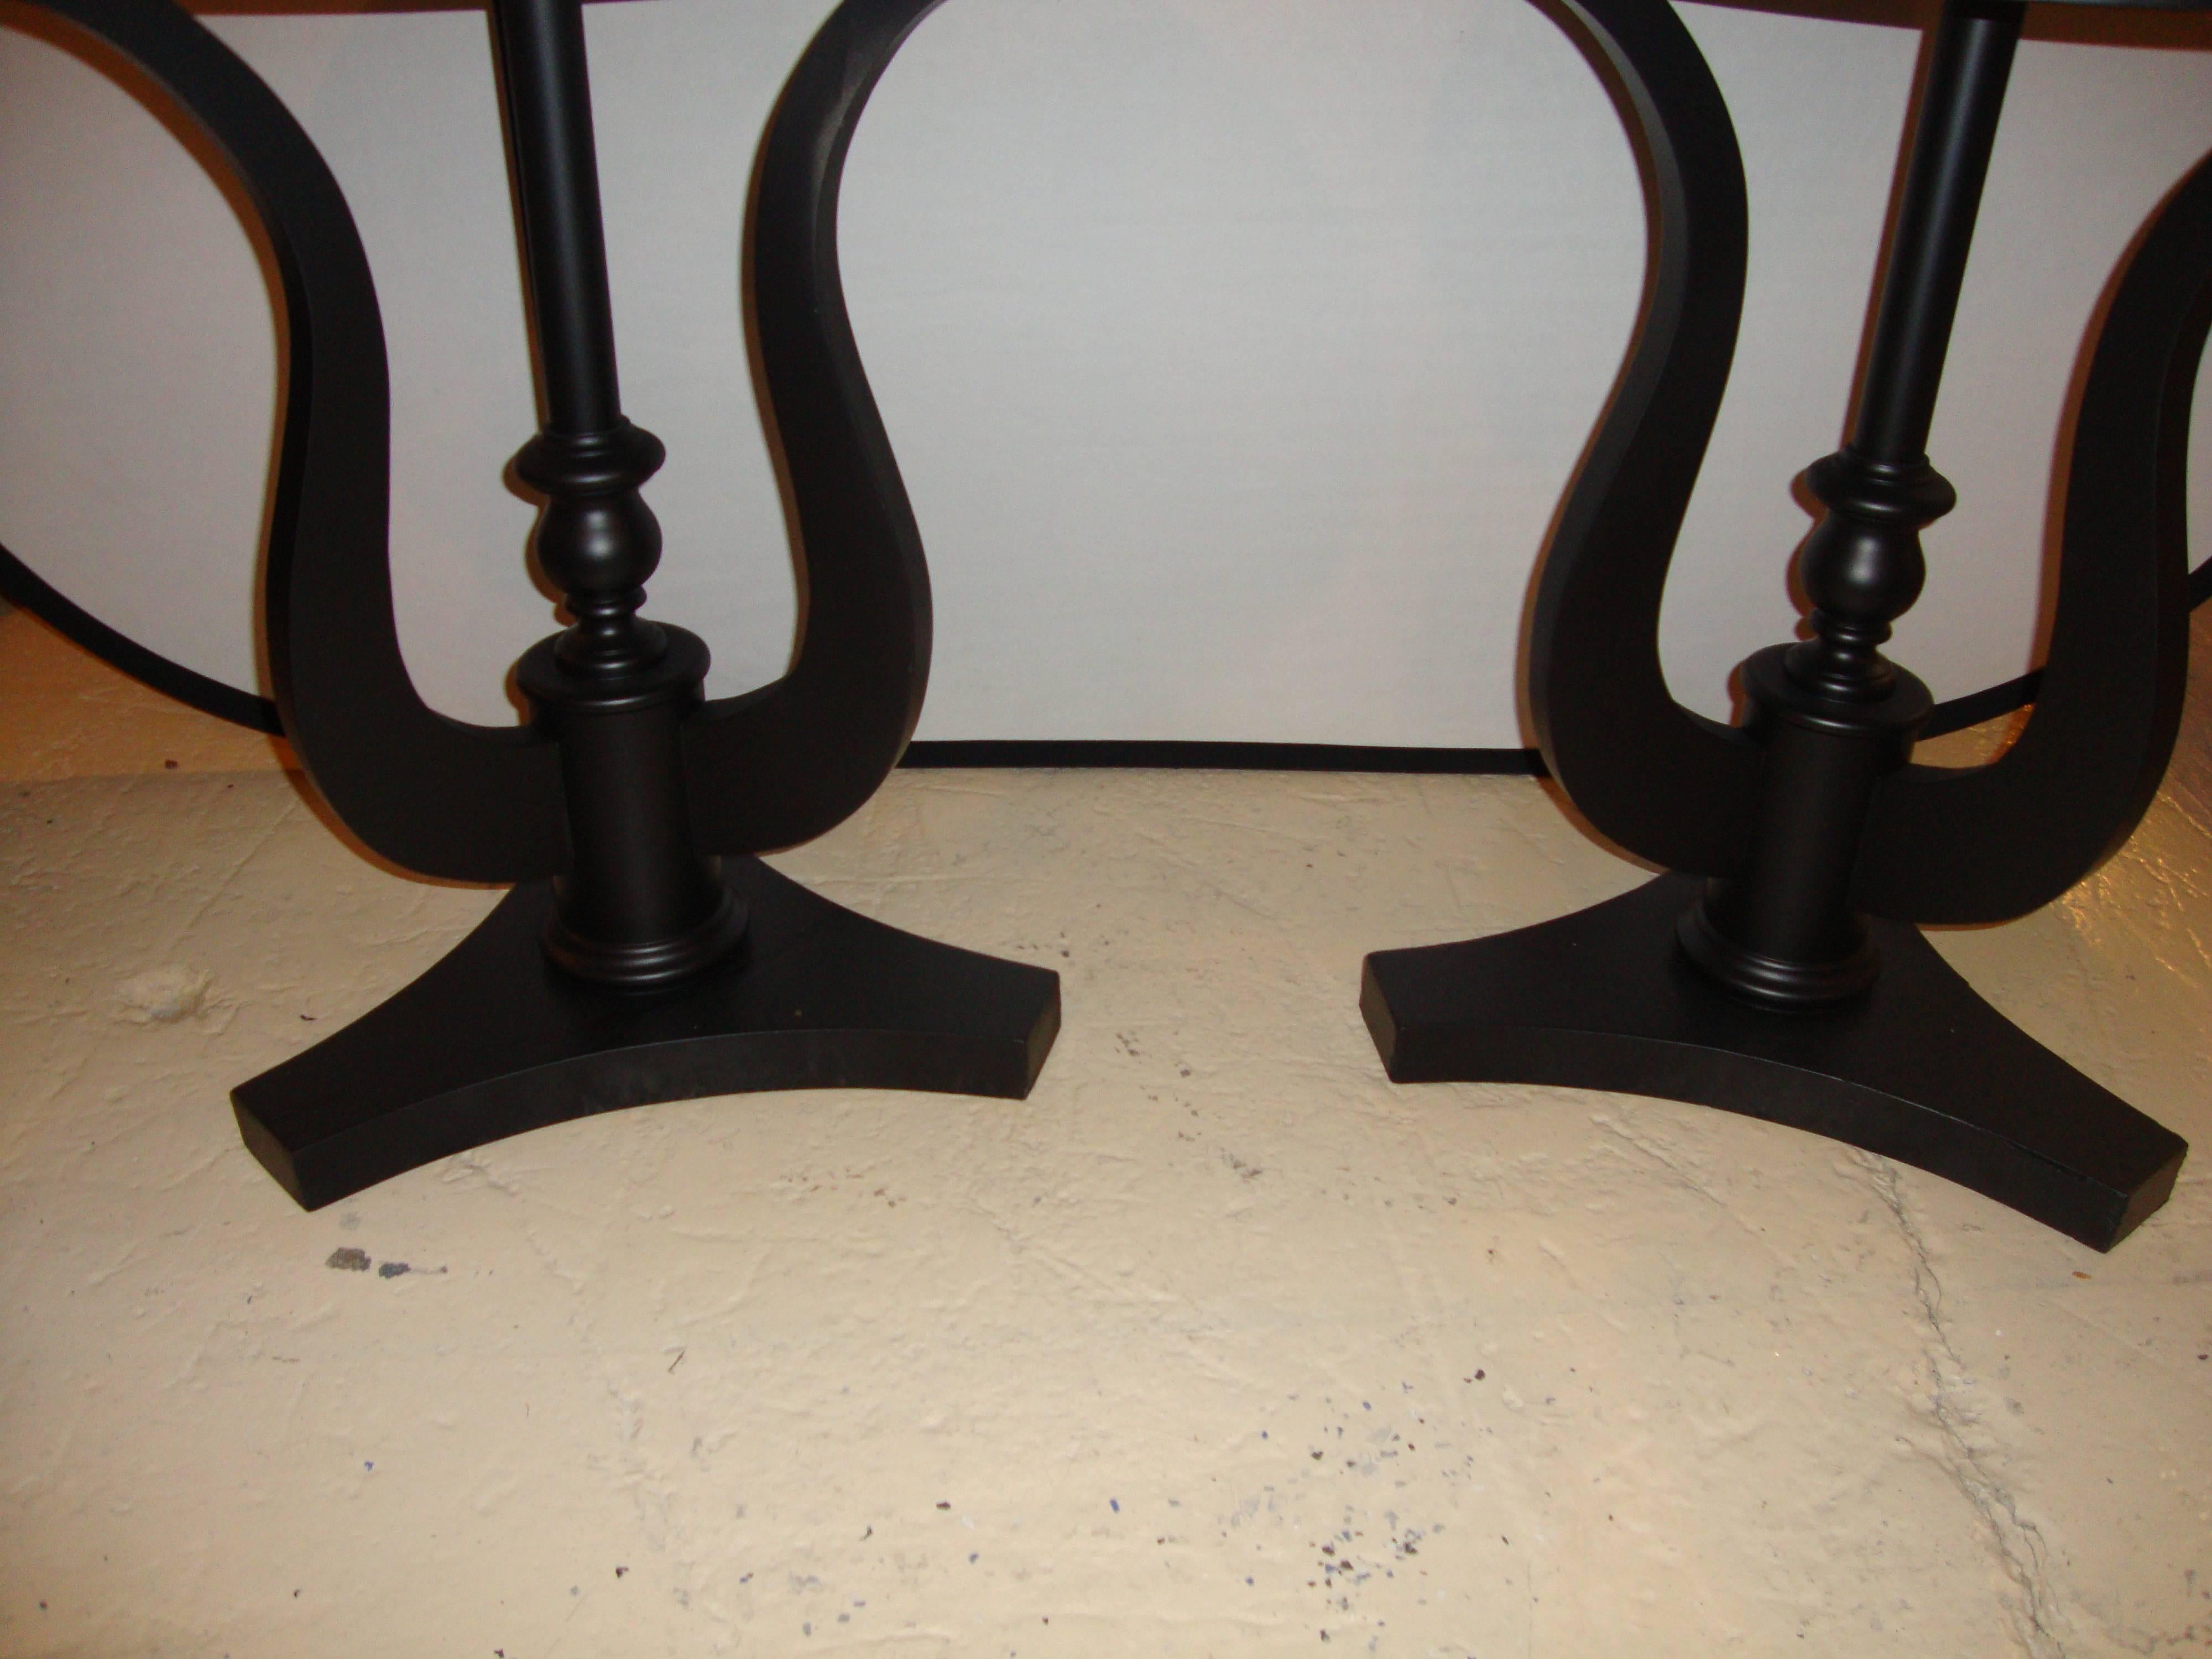 Pair of Art Deco ebony based end tables with black marble tops, circa 1940s. Diameter: 26 inches.